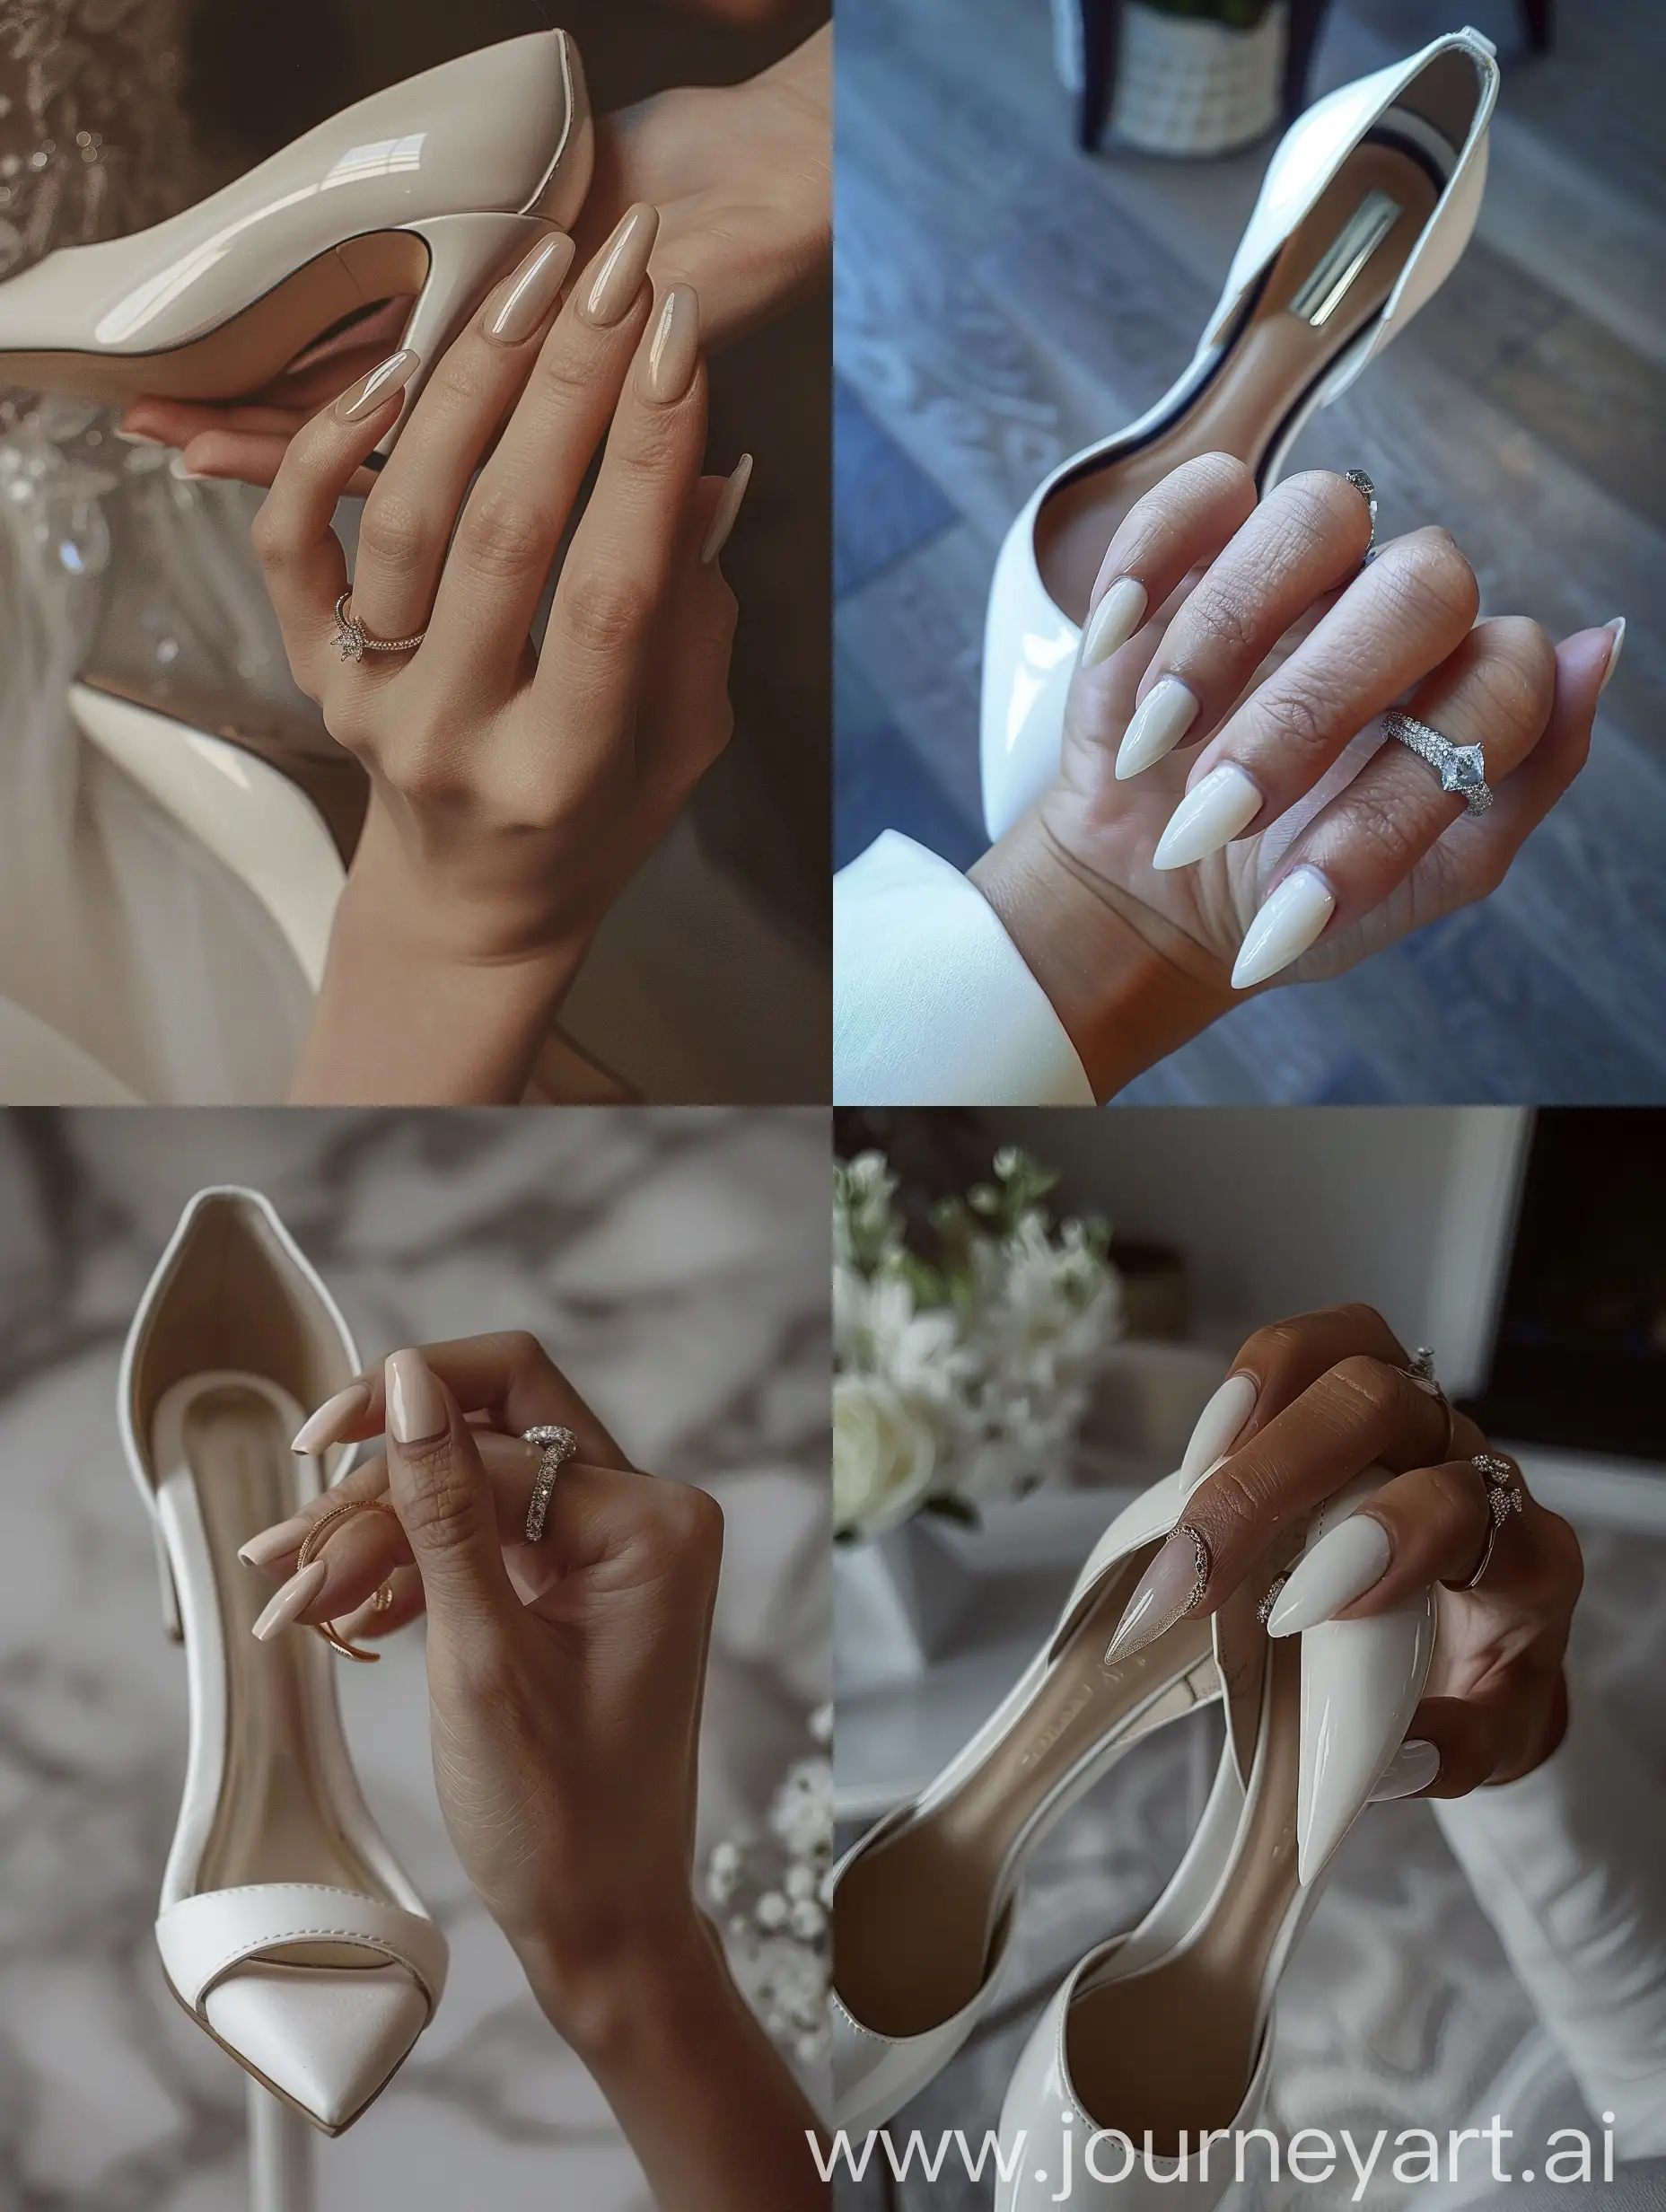 Aesthetic Instagram photo of a woman's hand holding a pair of white heels, wedding ring, manicured